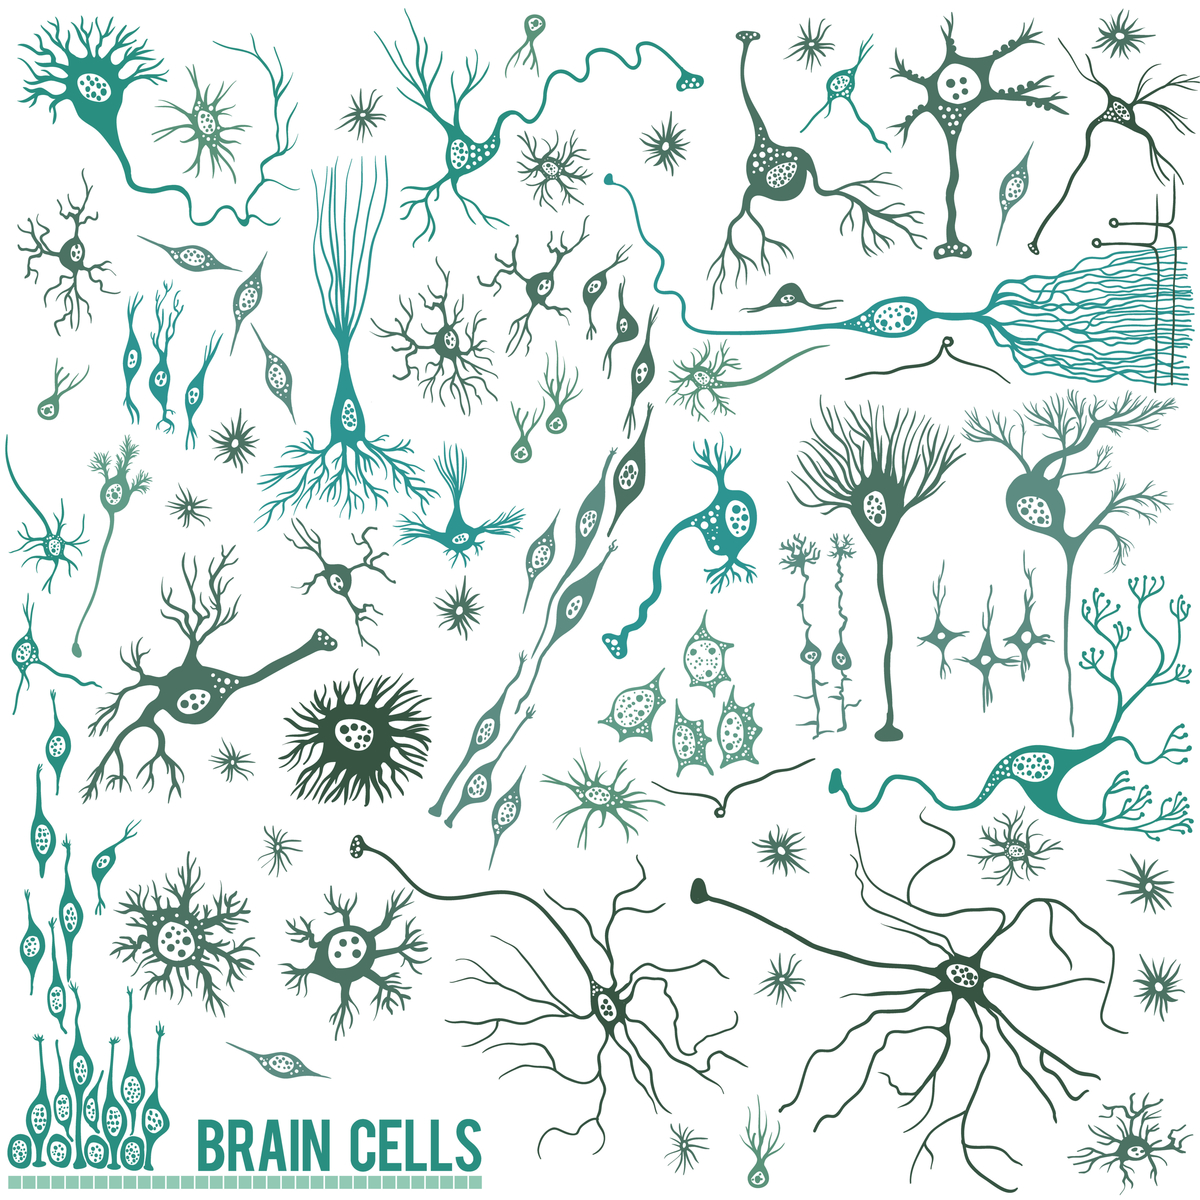 Brain cells: There are lots of different cell types in the brain; neurons are just one. But neurons happen to be a particularly vulnerable cell type in HD.   